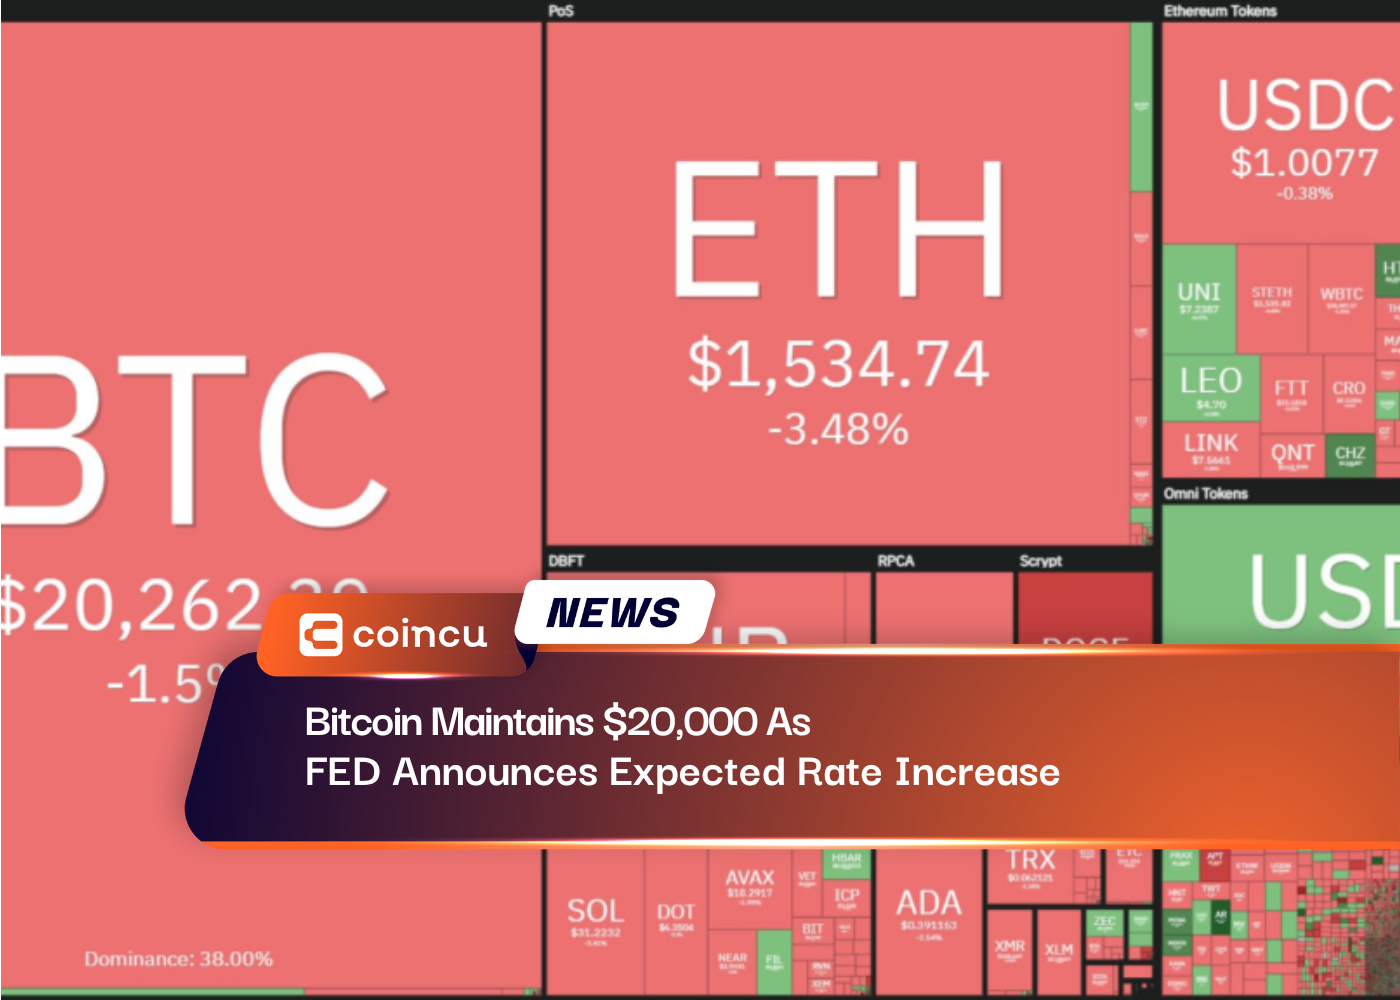 Bitcoin Maintains $20,000 As FED Announces Expected Rate Increase